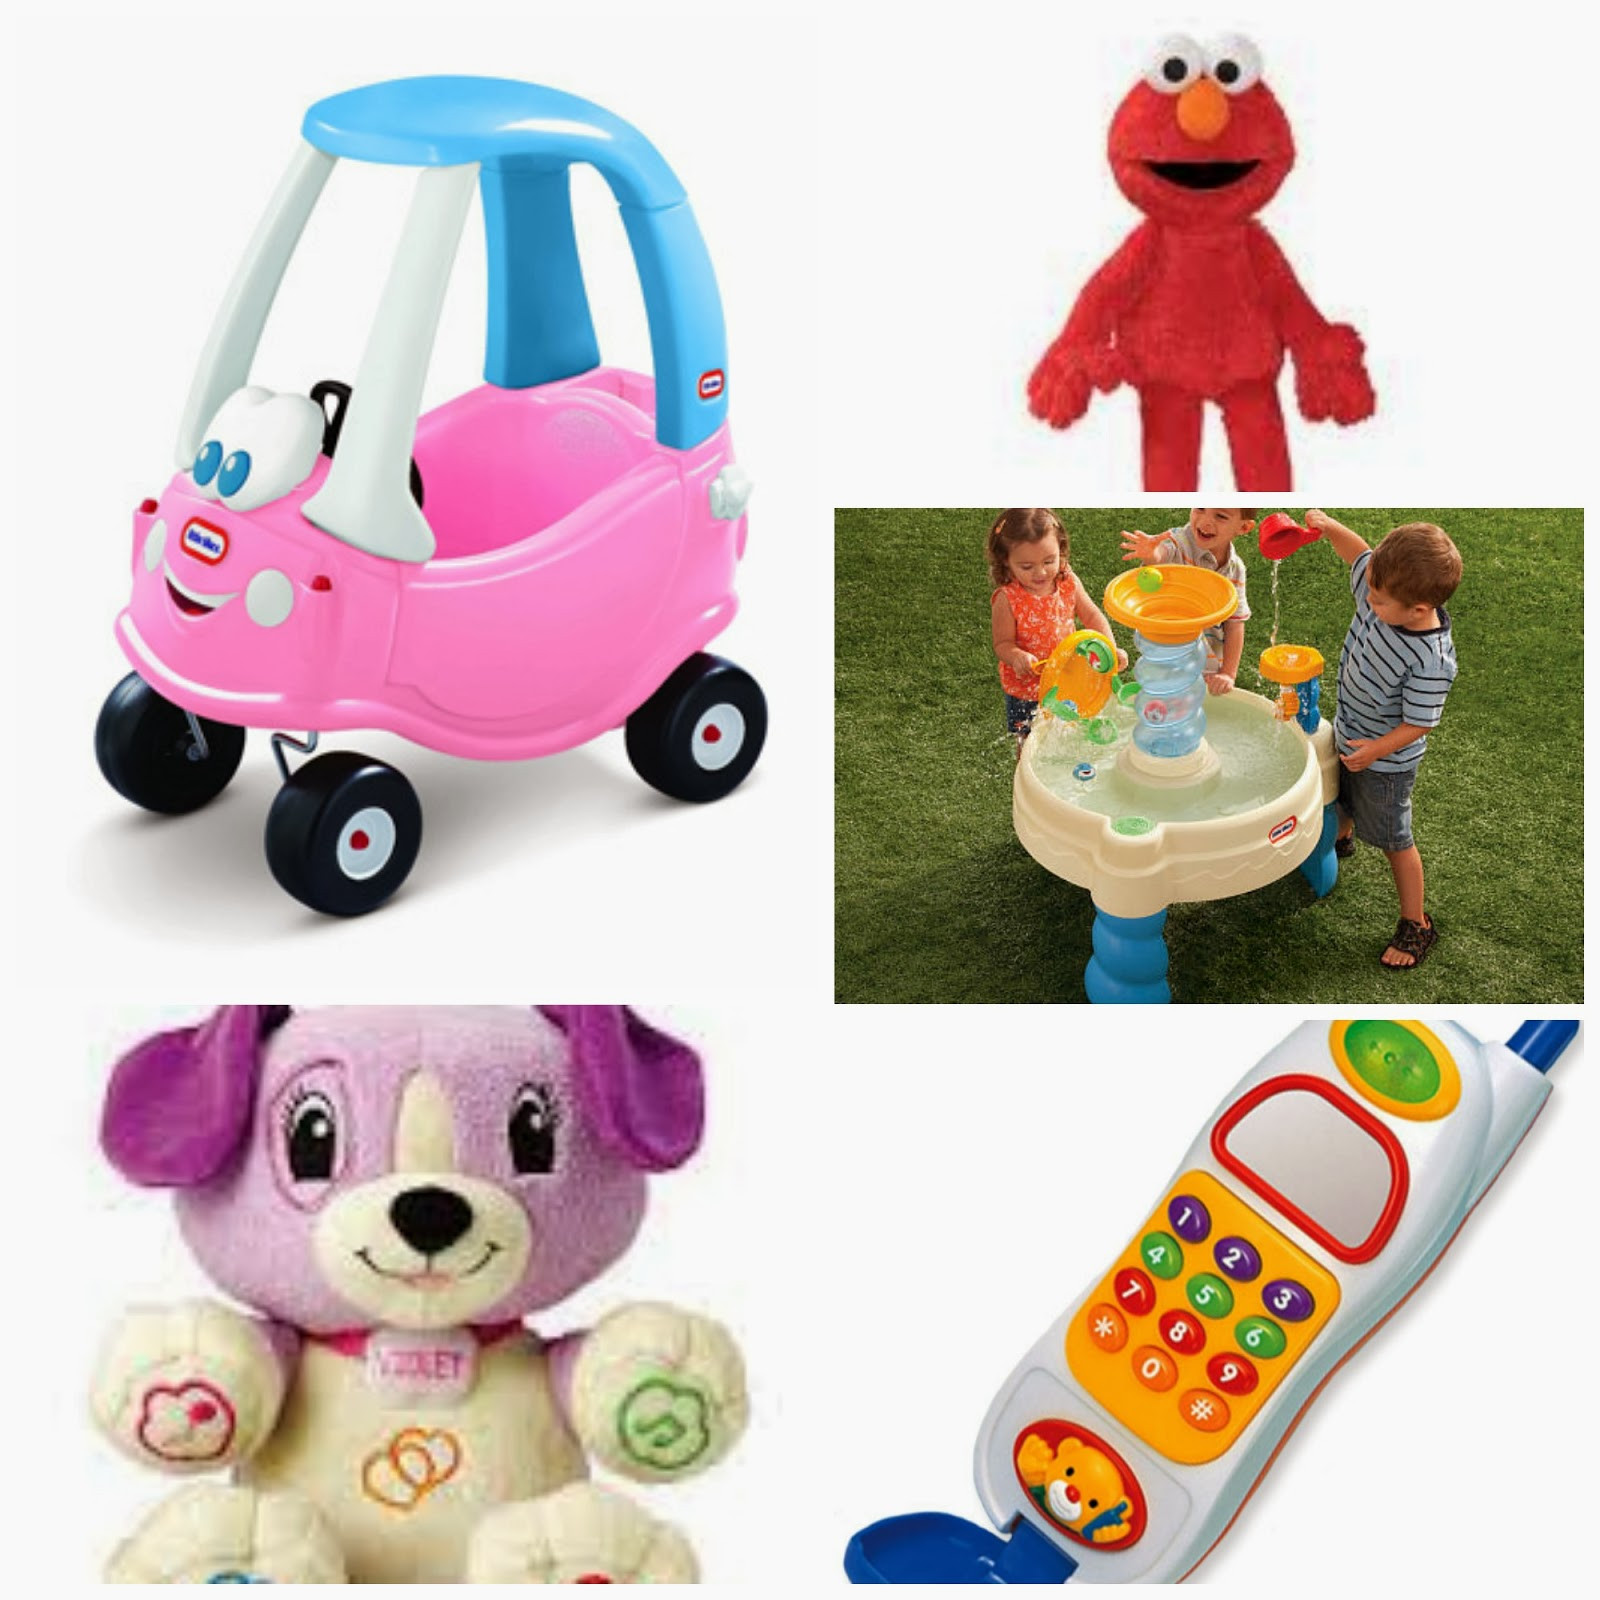 Birthday Gift Ideas For One Year Old Baby Girl
 Gifts Ideas for a 1 Year Old Girl